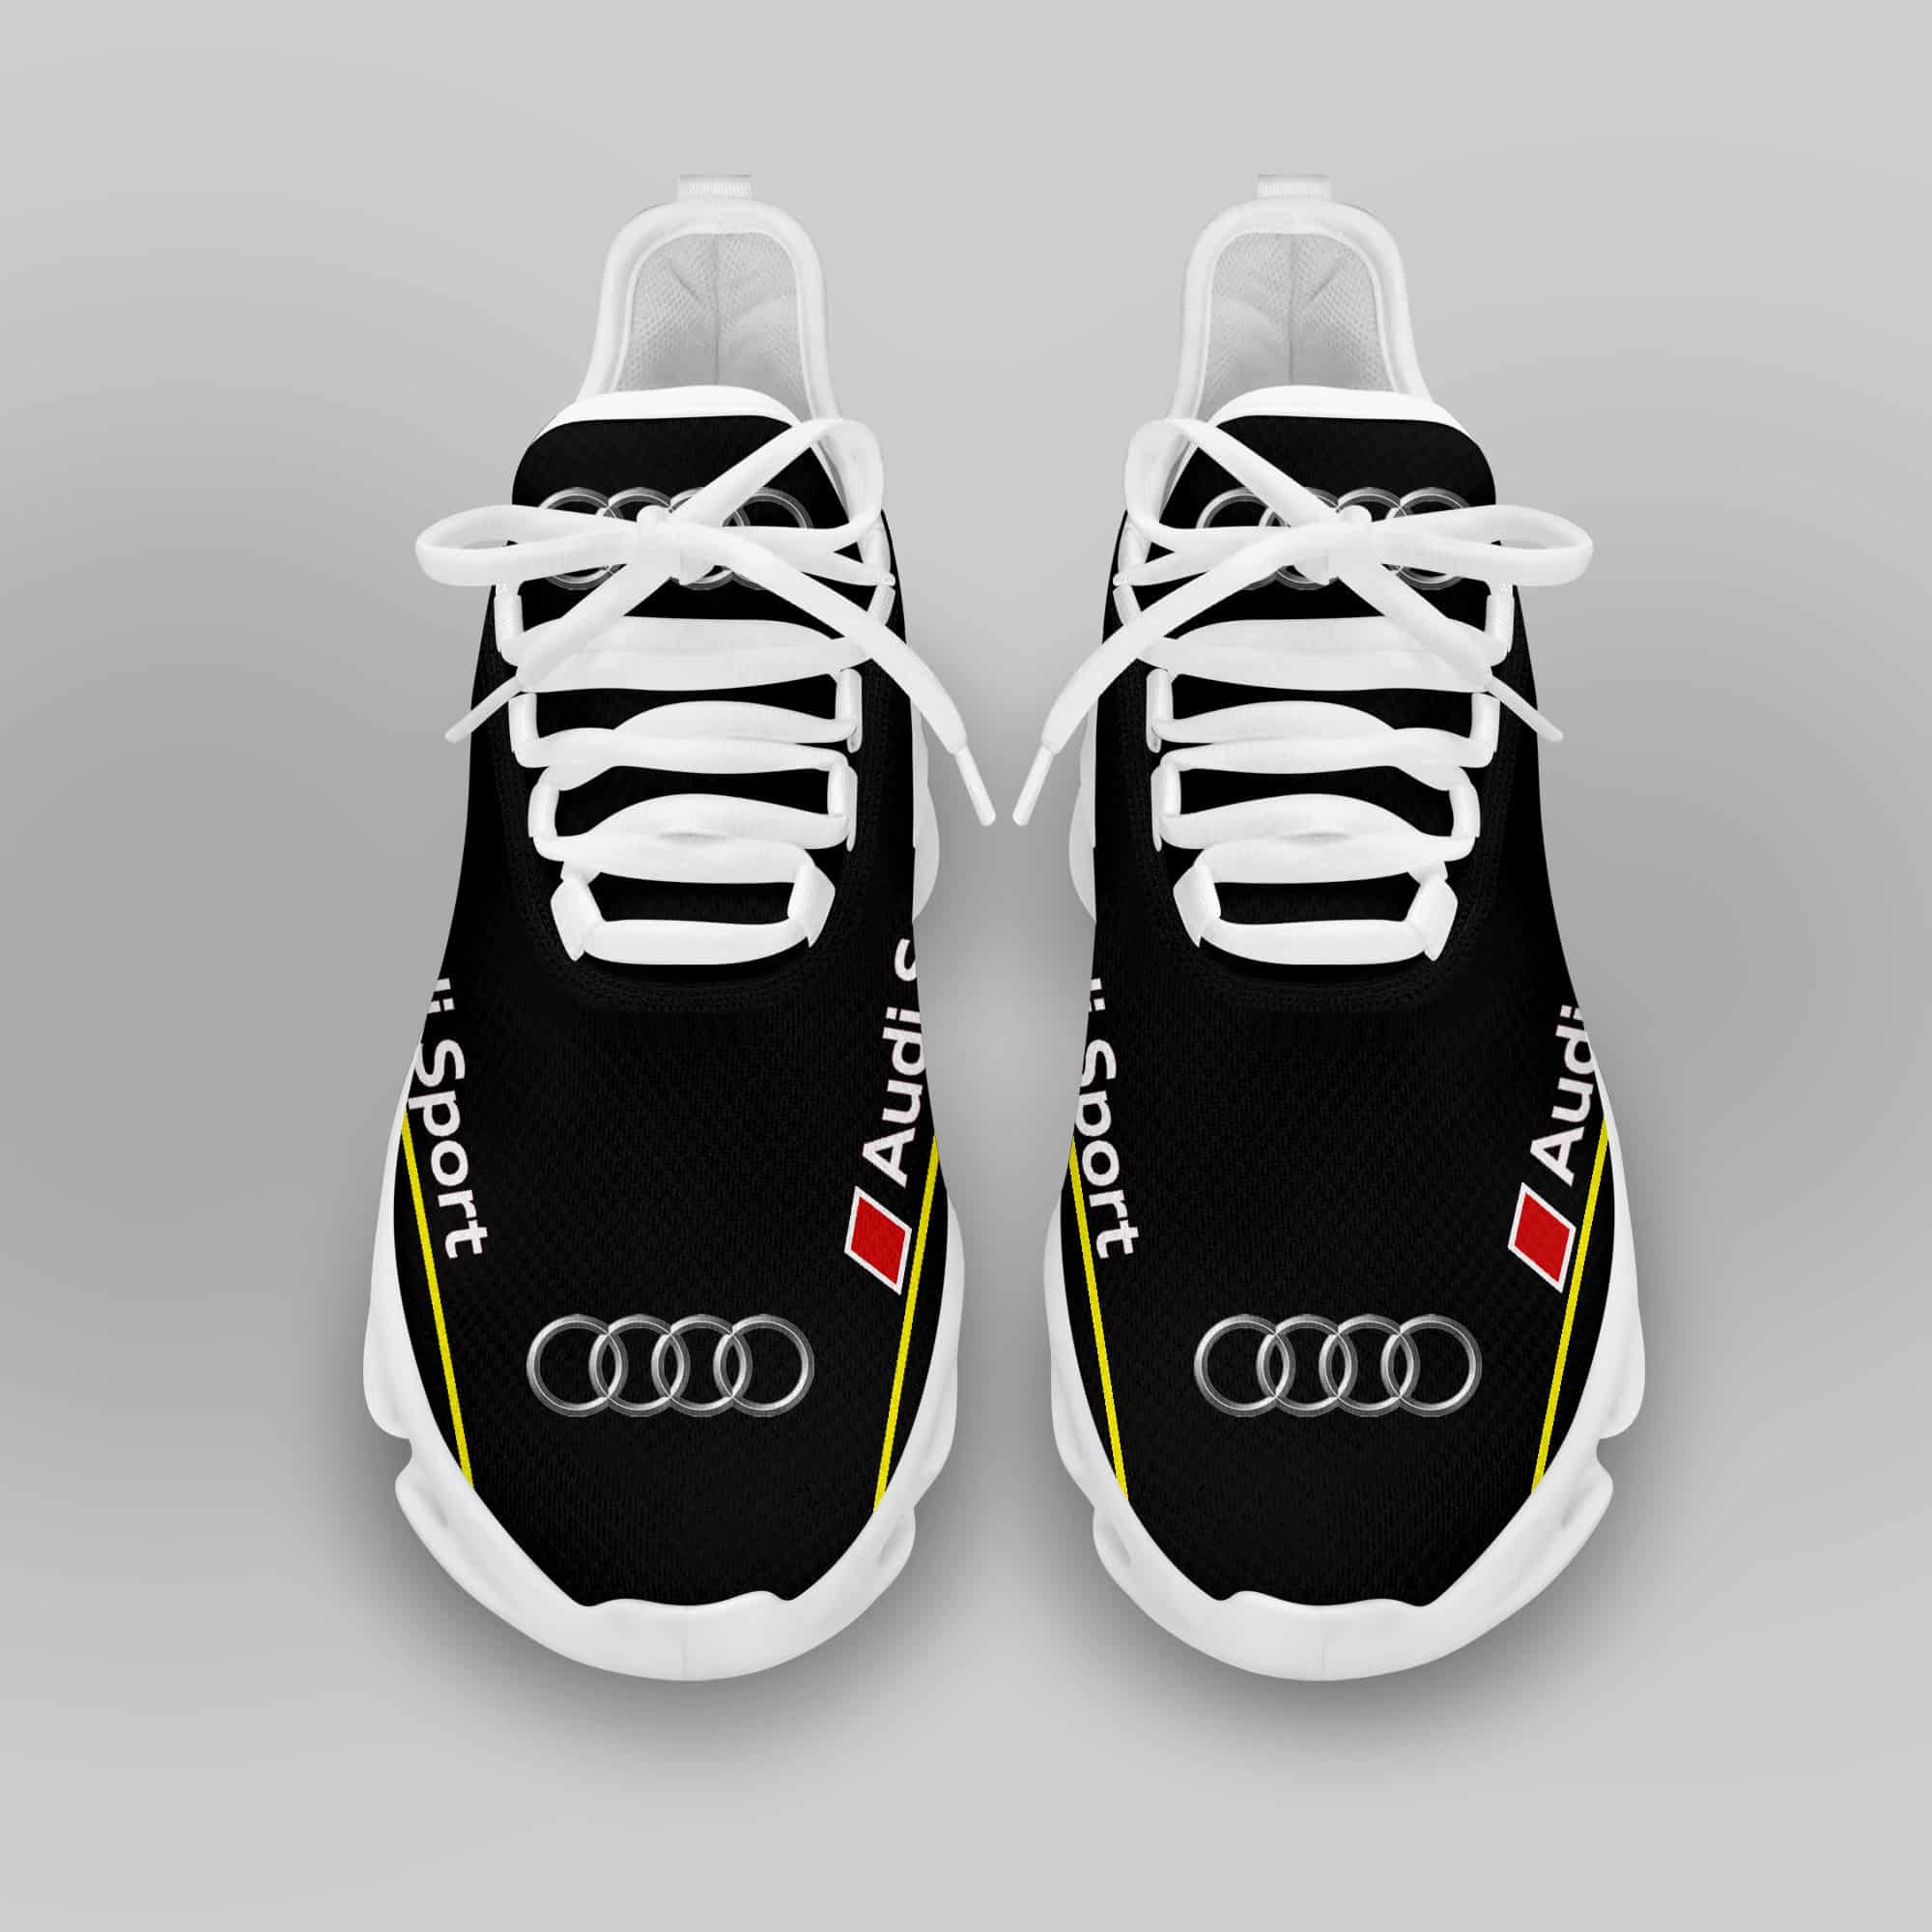 Audi Sport Running Shoes Max Soul Shoes Sneakers Ver 33 3